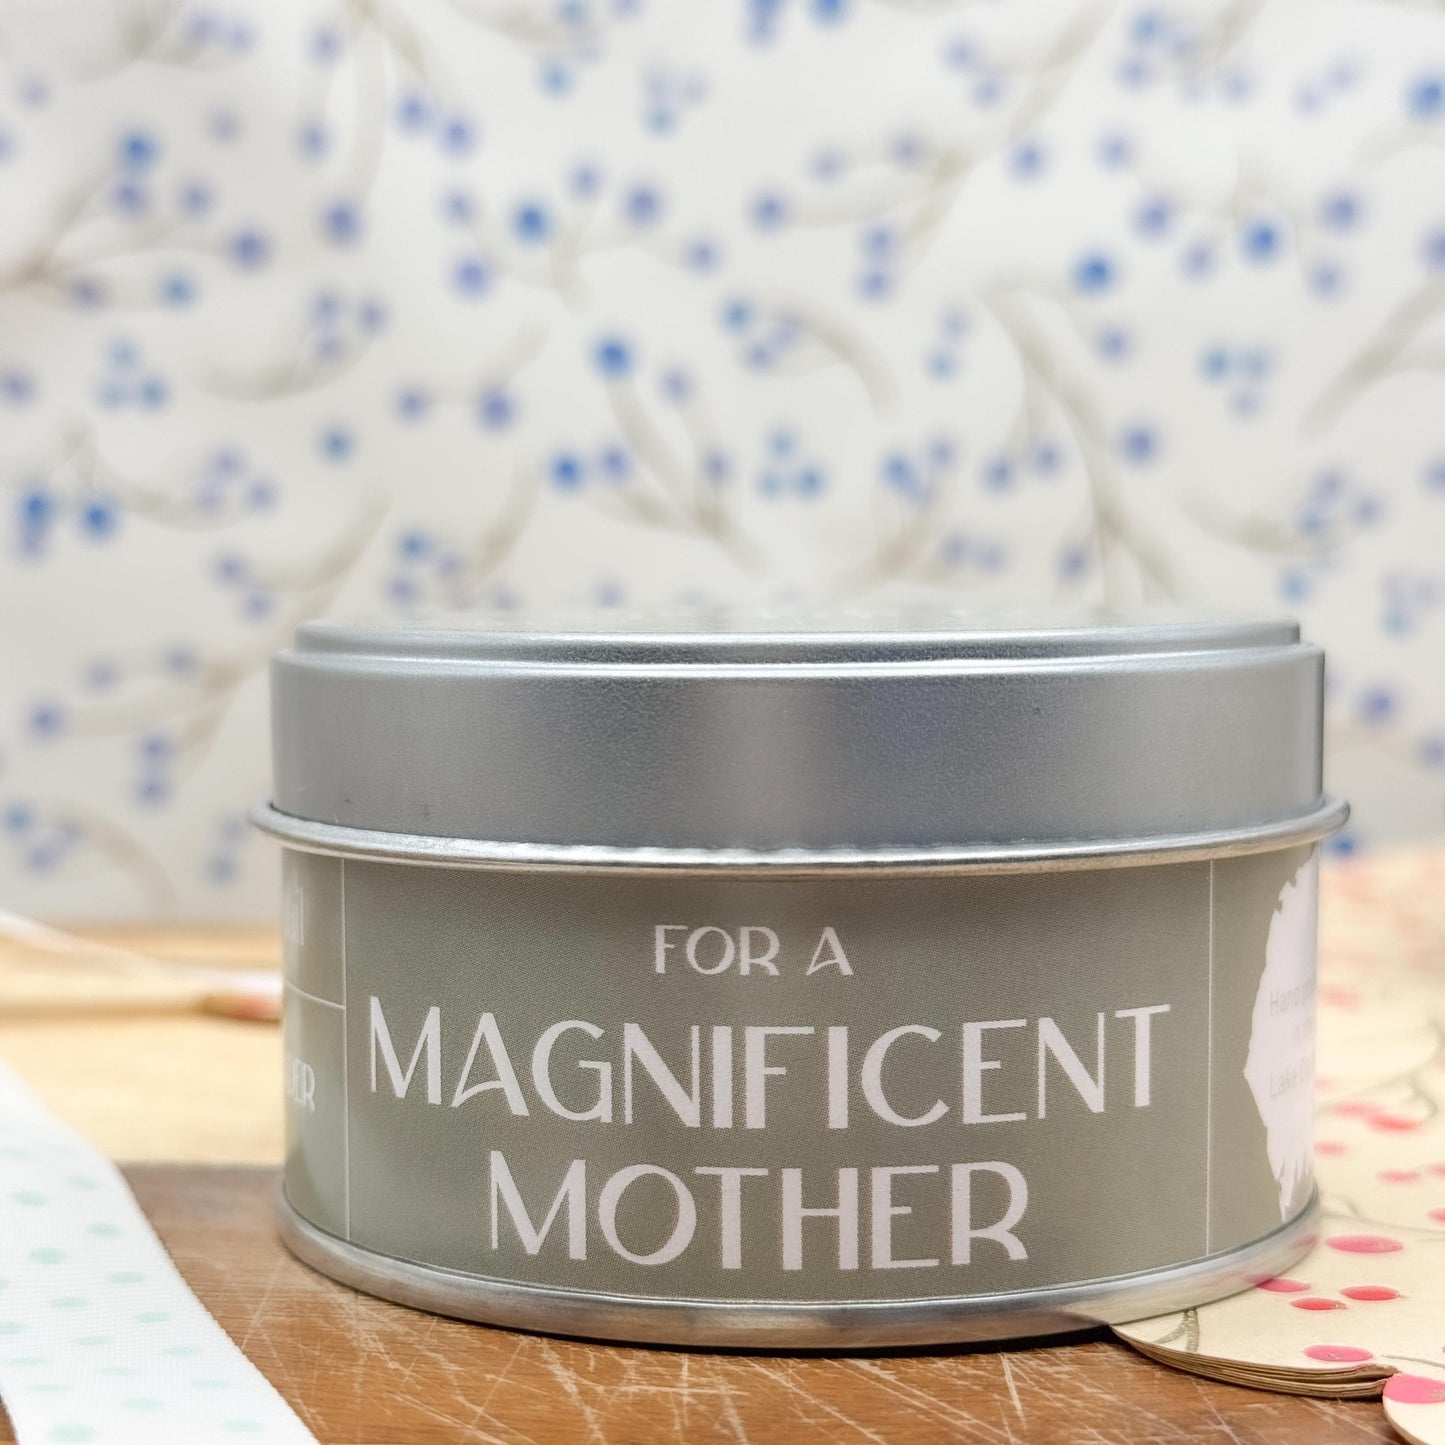 'For a Magnificent Mother' Lavender & Bay Occasion Candle